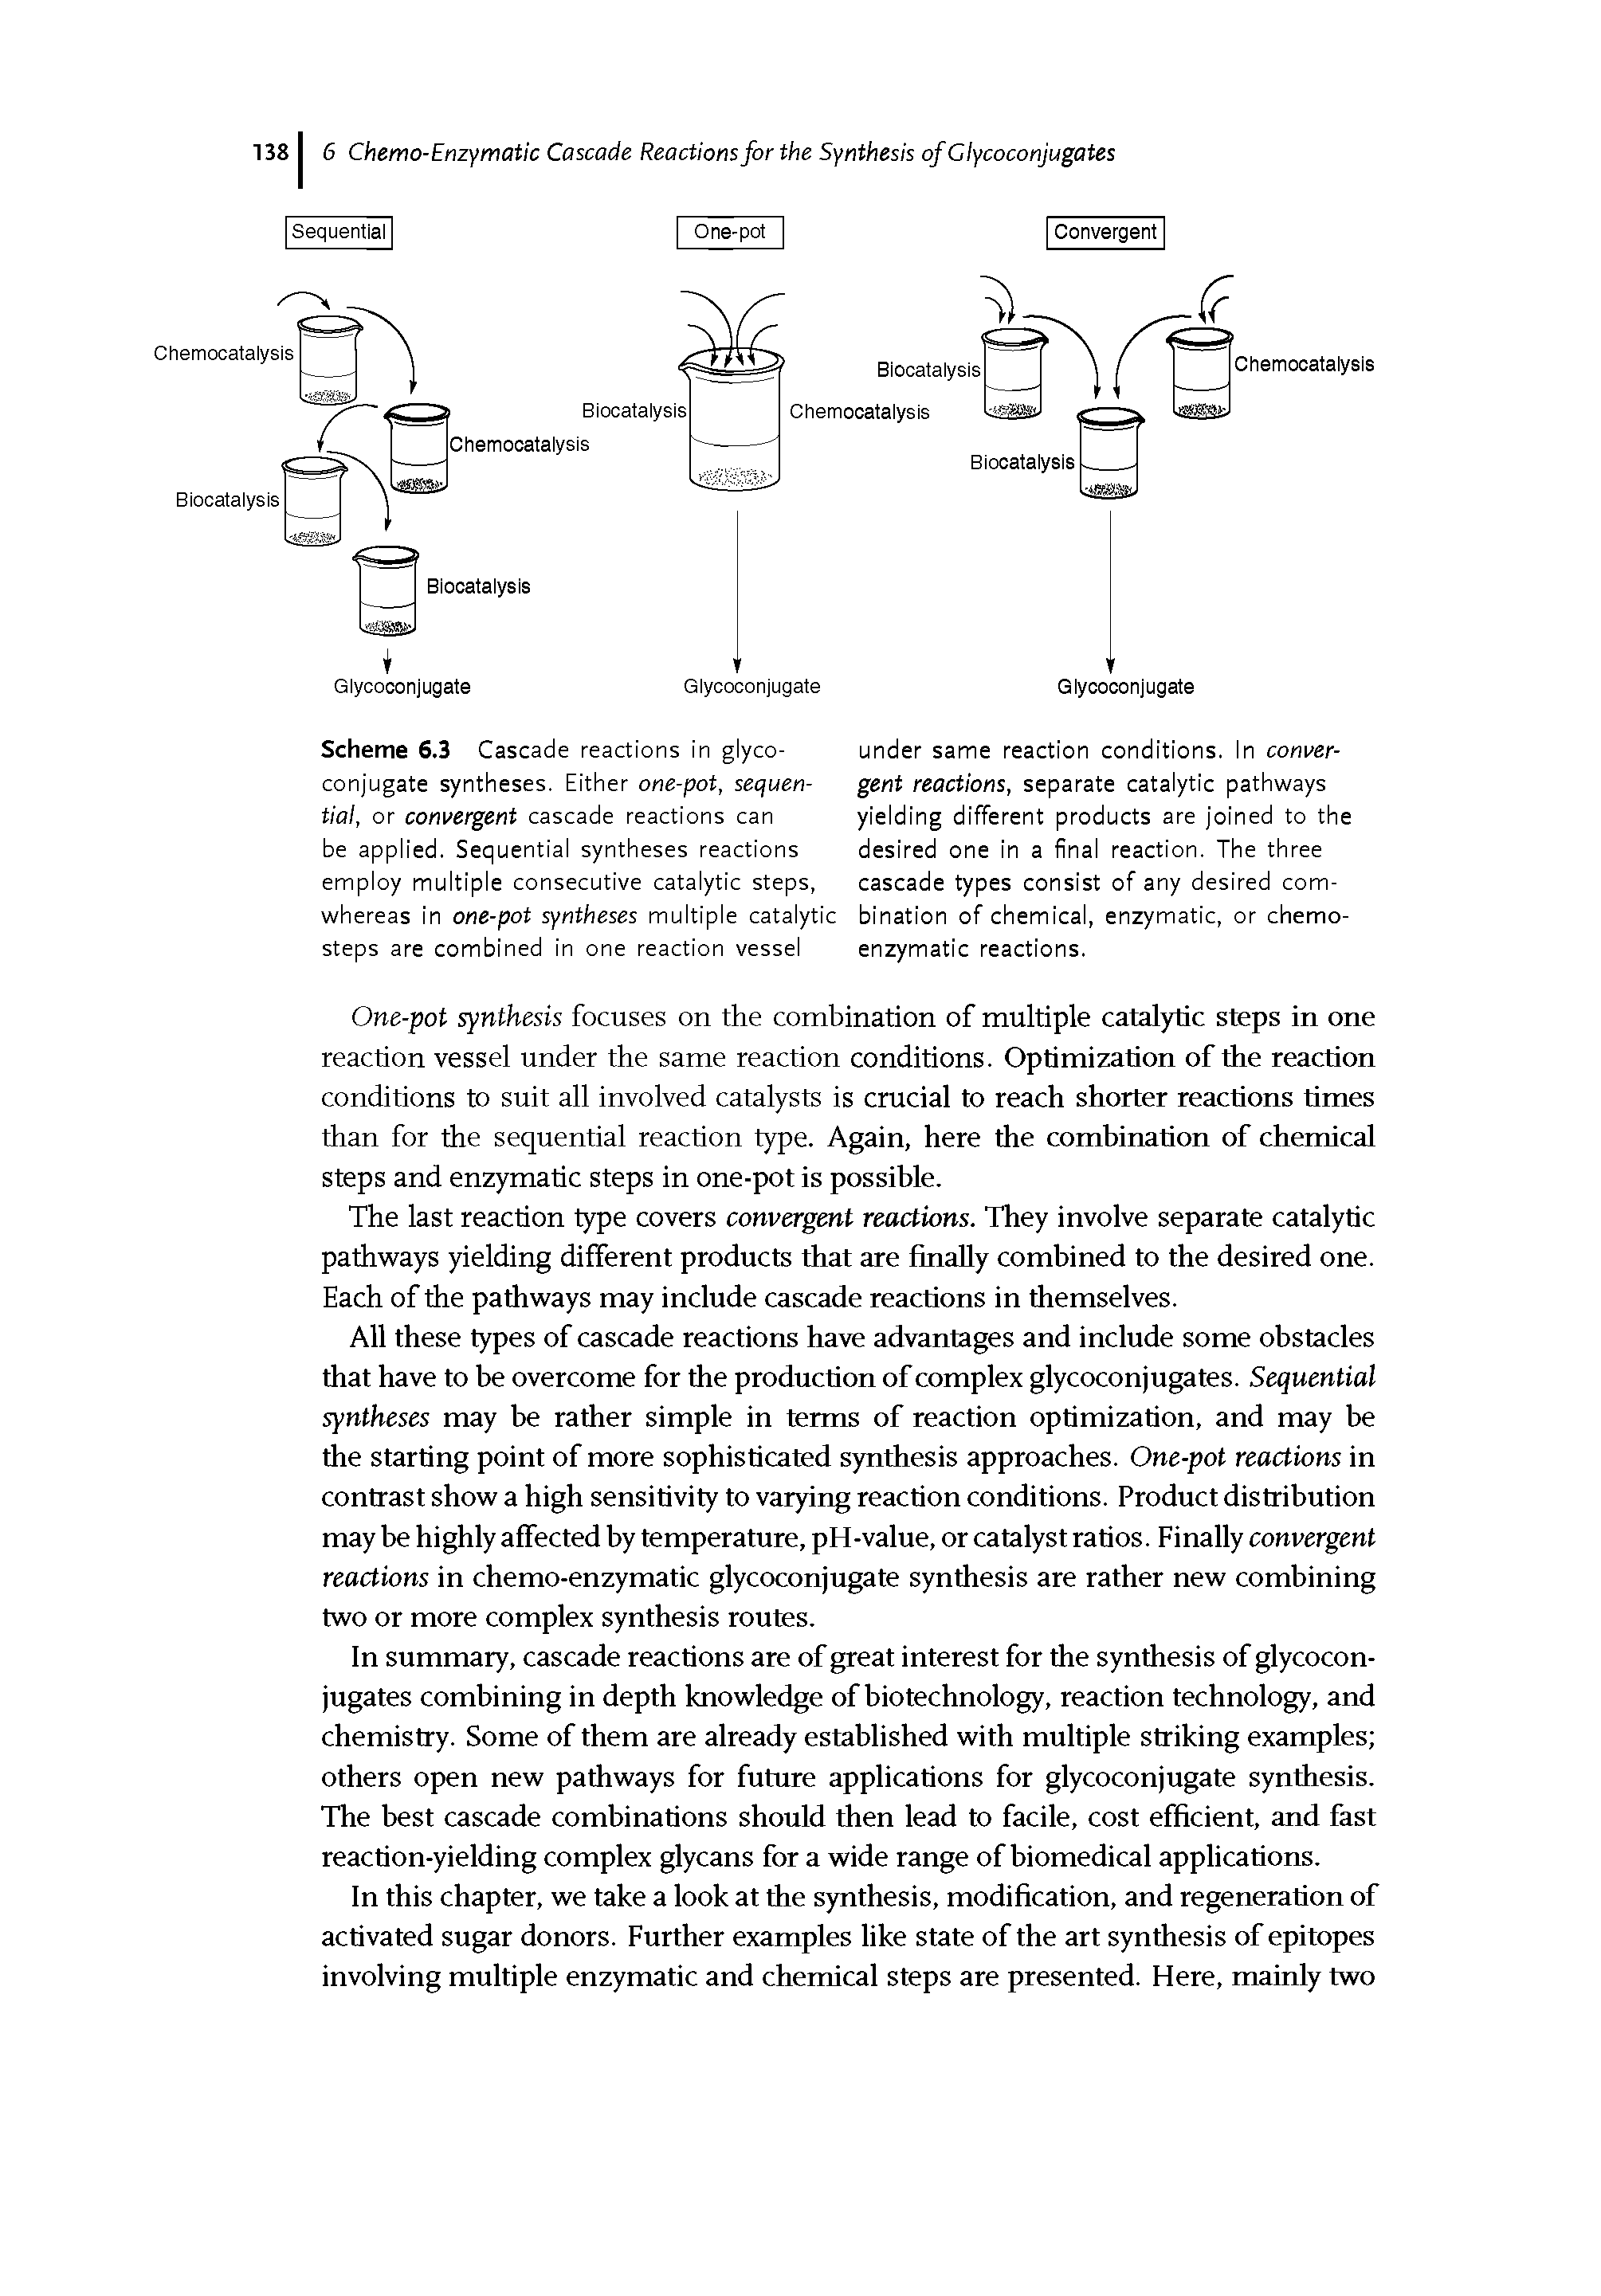 Scheme 6.3 Cascade reactions in glyco-conjugate syntheses. Either one-pot, sequential, or convergent cascade reactions can be applied. Sequential syntheses reactions employ multiple consecutive catalytic steps, whereas in one-pot syntheses multiple catalytic steps are combined in one reaction vessel...